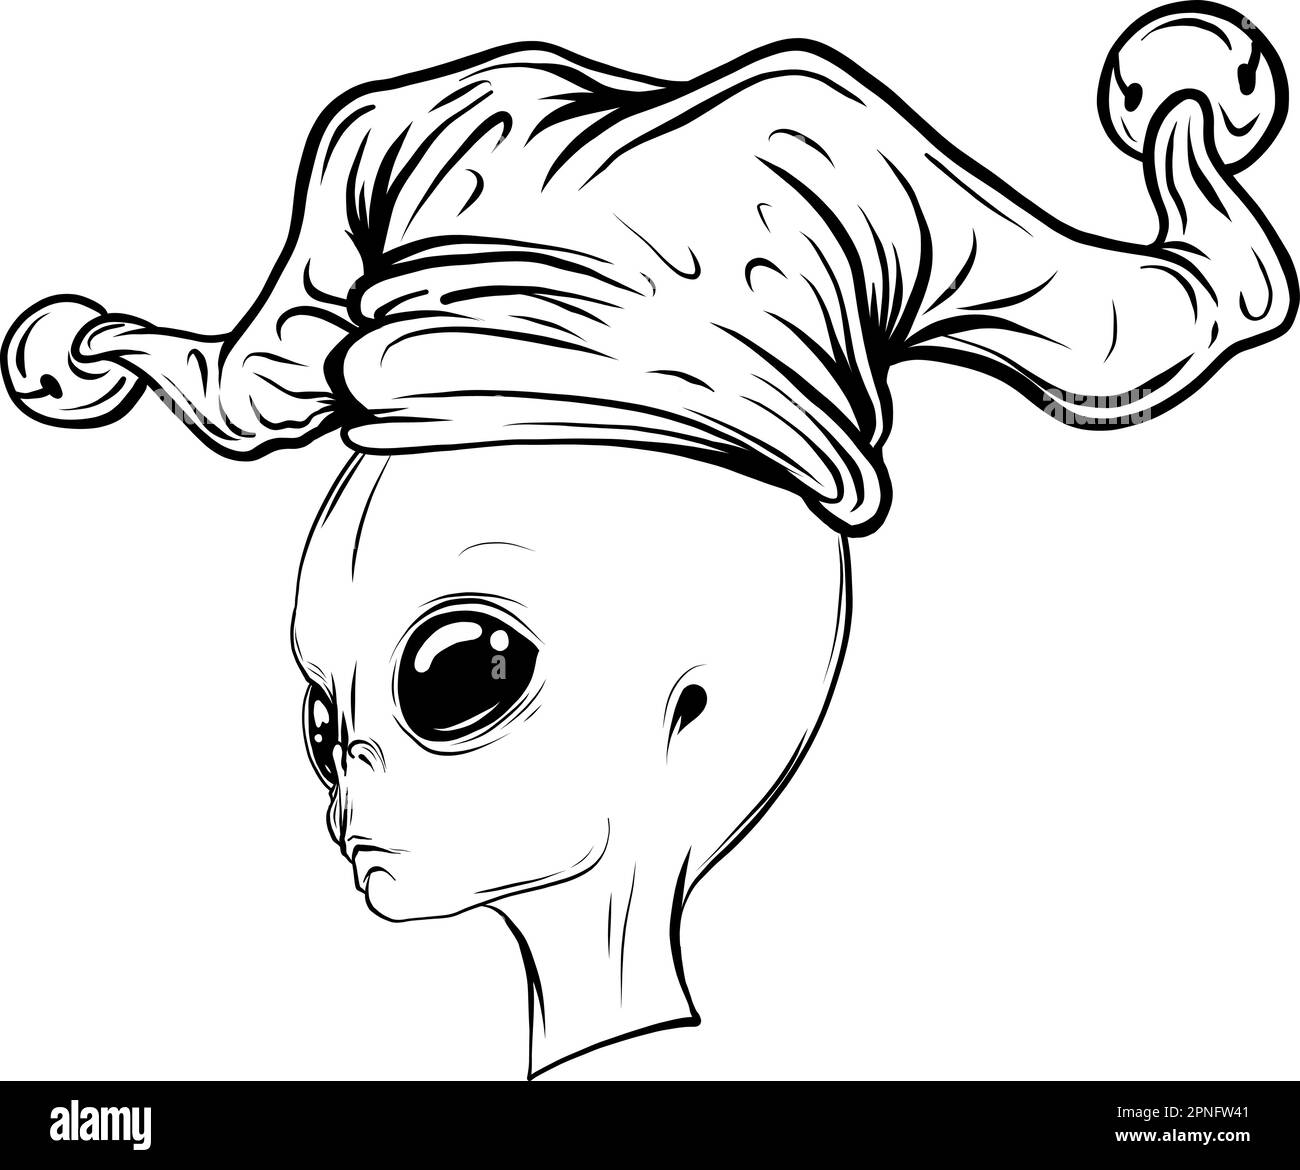 Vintage monochrome alien face concept isolated vector illustration Stock Vector